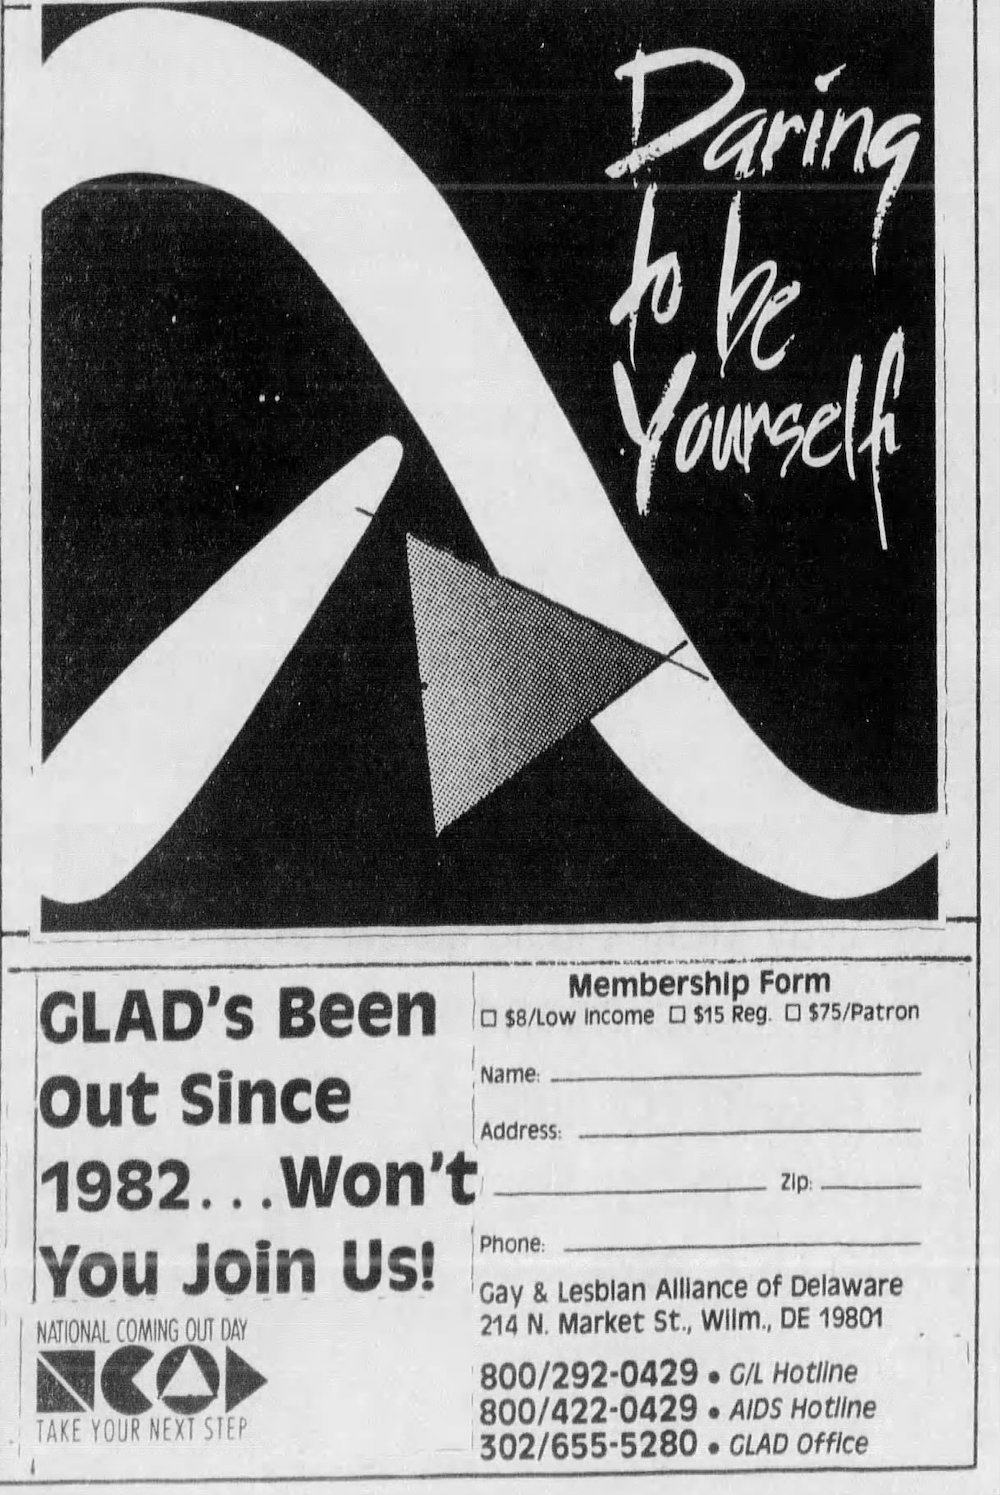 A newspaper clipping with a graphic featuring a lambda symbol and a triangle with the text “Daring to be yourself.”